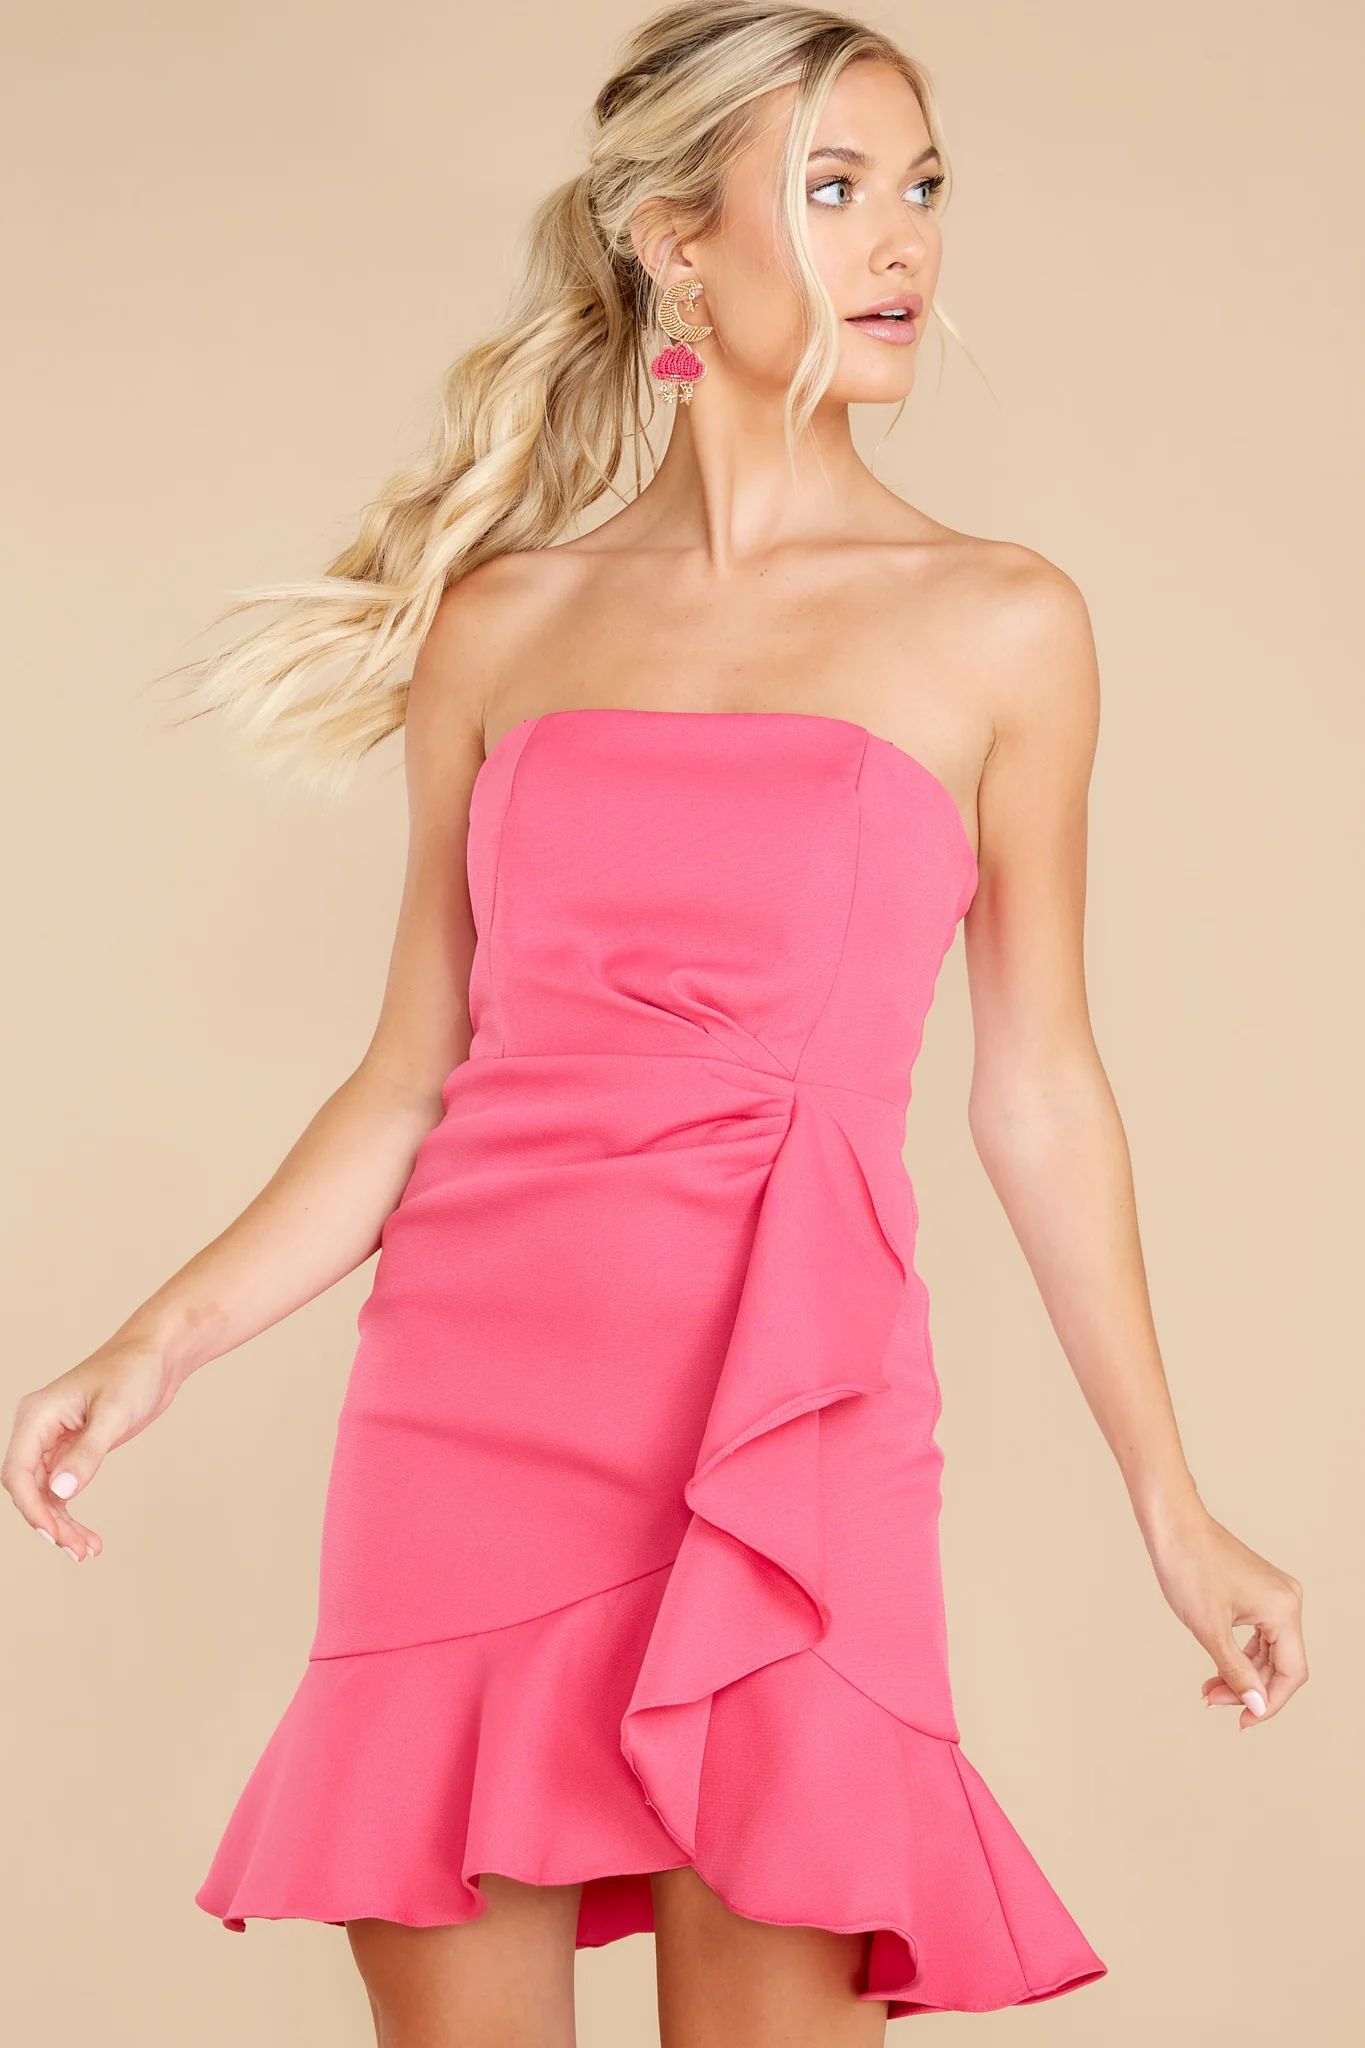 Carefully Considered Hot Pink Dress | Red Dress 